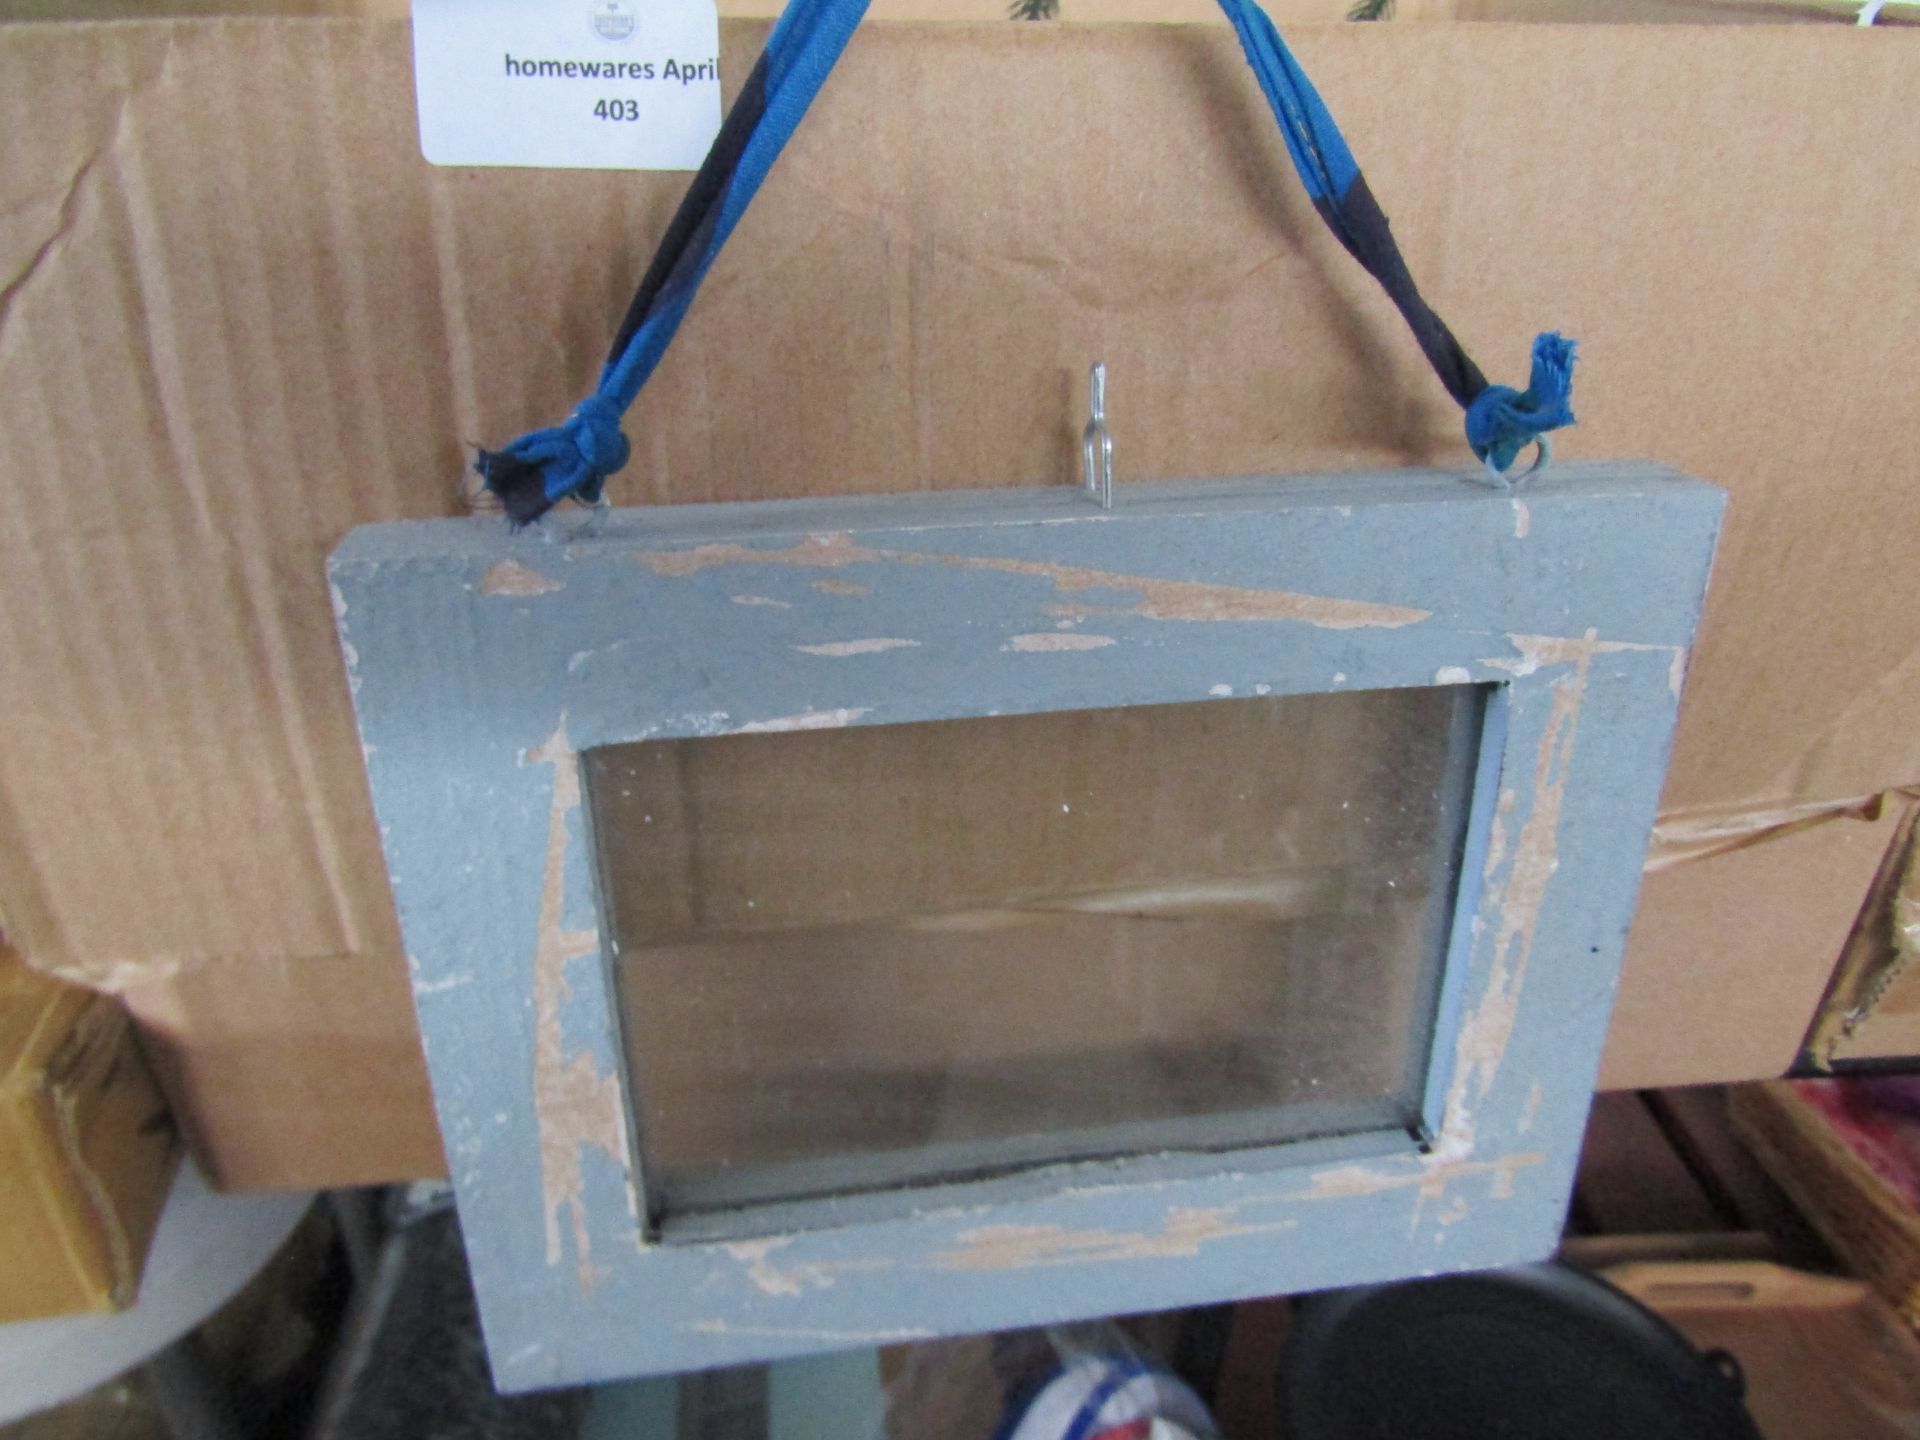 2x Small Rustic Display Frame - Duck Egg Blue 6x4 Photo size - New & Boxed.